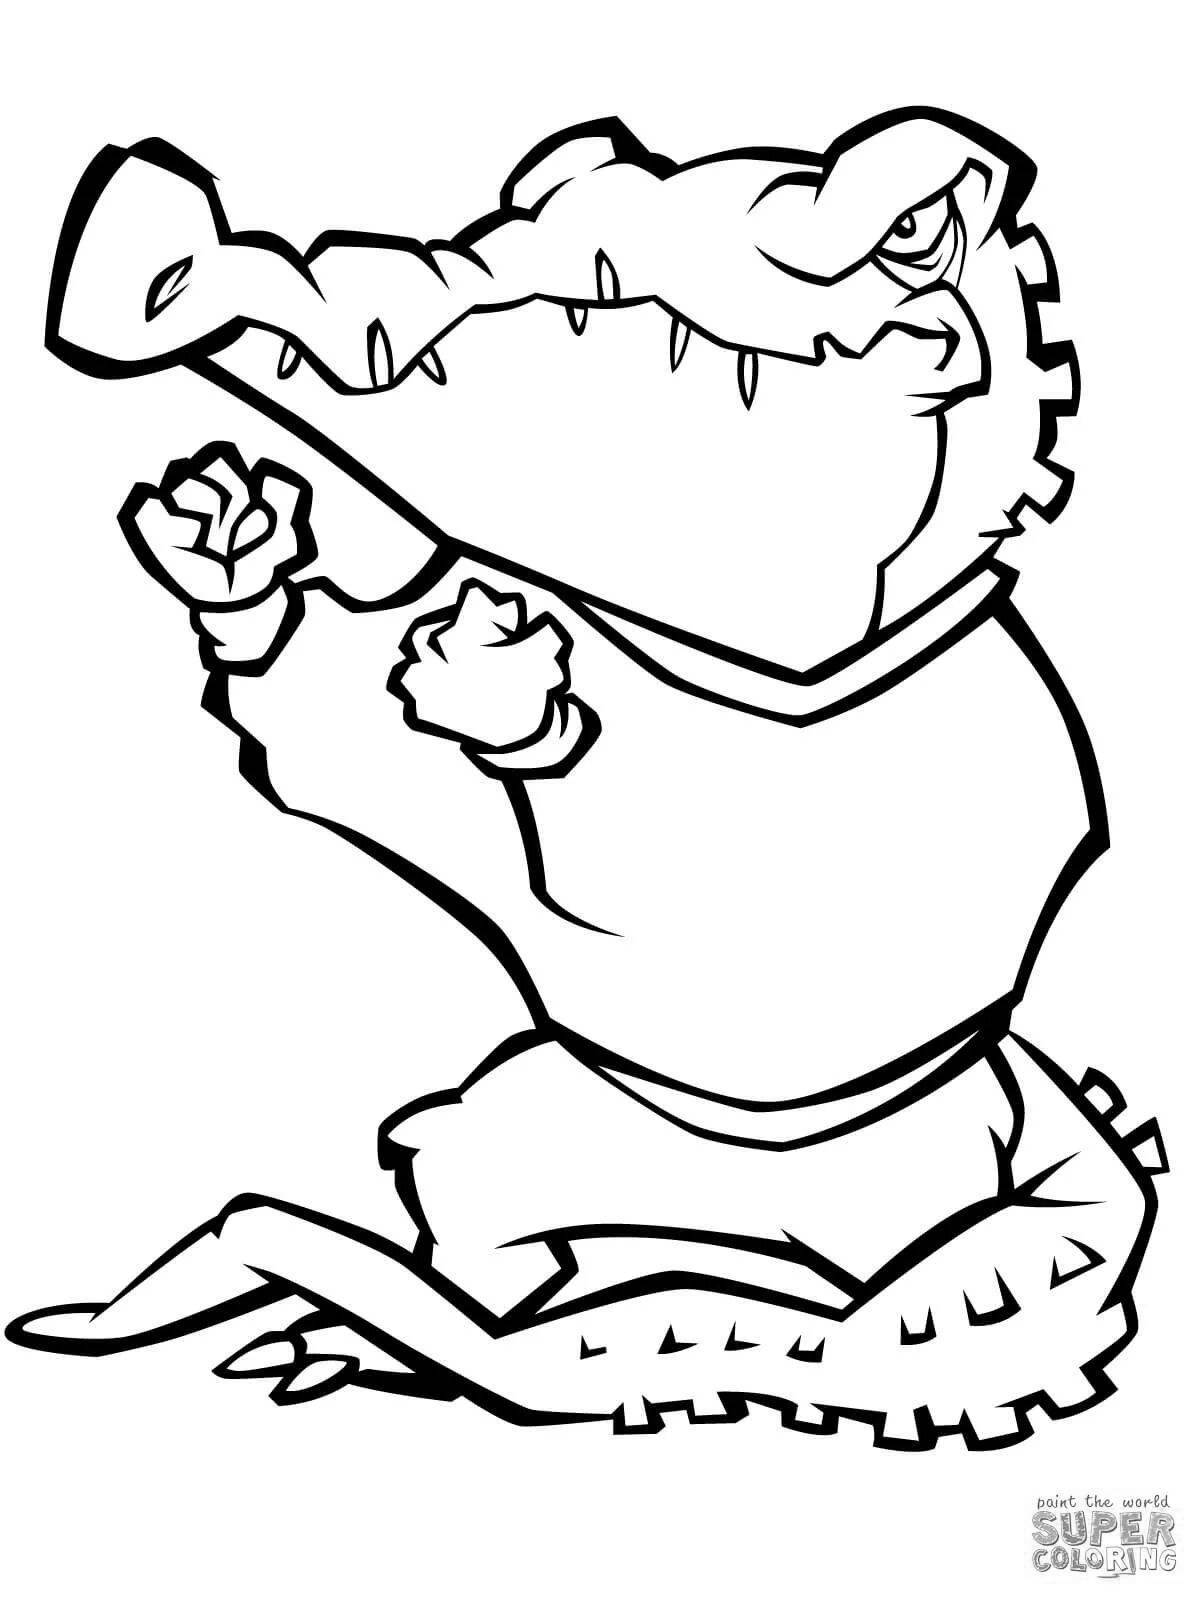 Monty's playful alligator coloring page